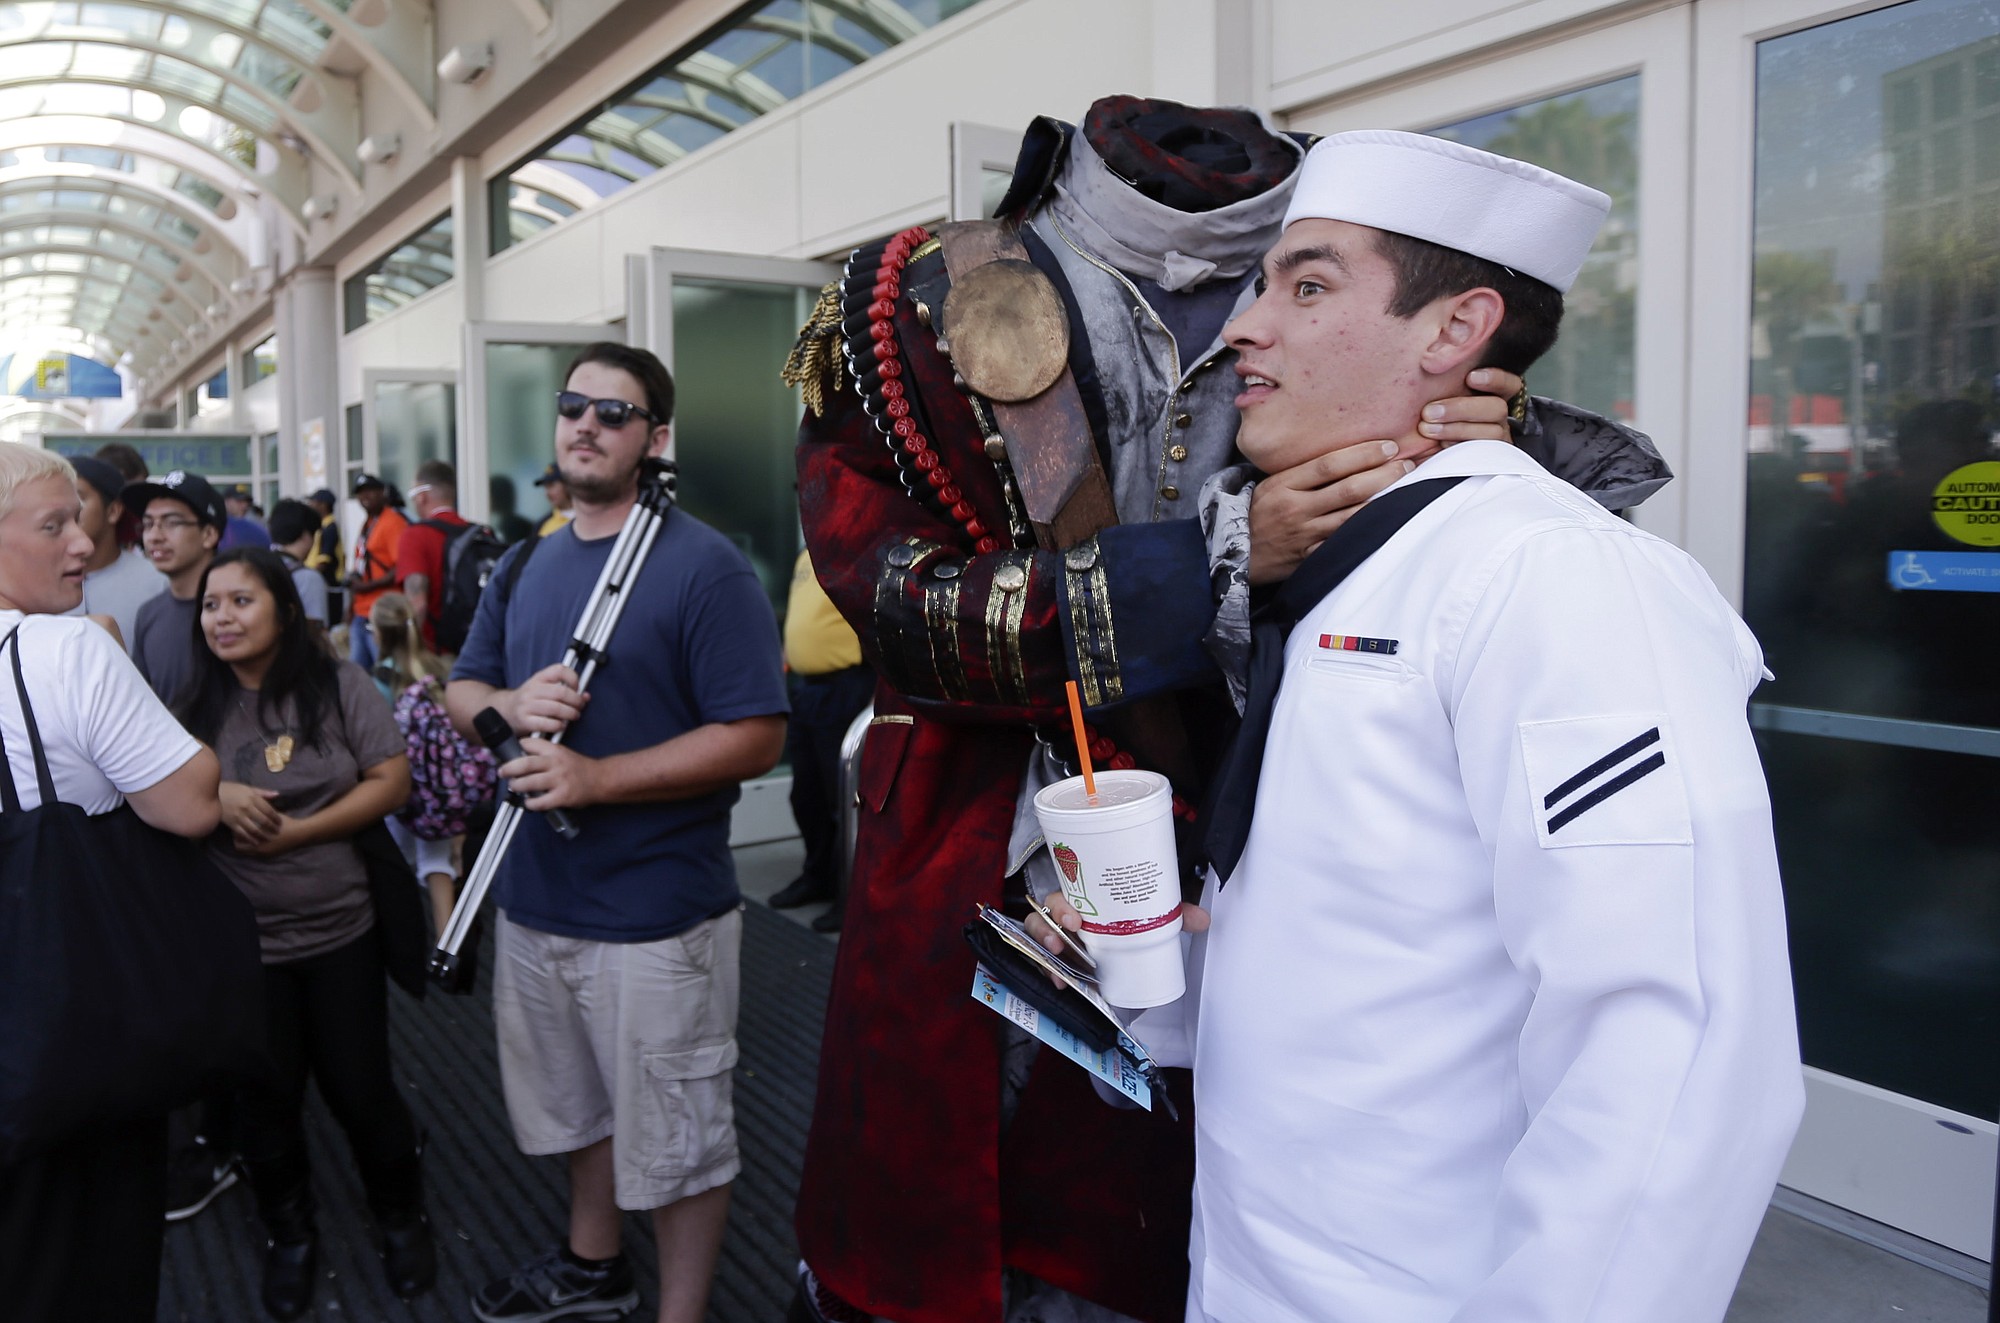 Navy Mineman Bradley Allred jokes as he has his picture taken with a headless character during Comic-Con 2013 in San Diego.